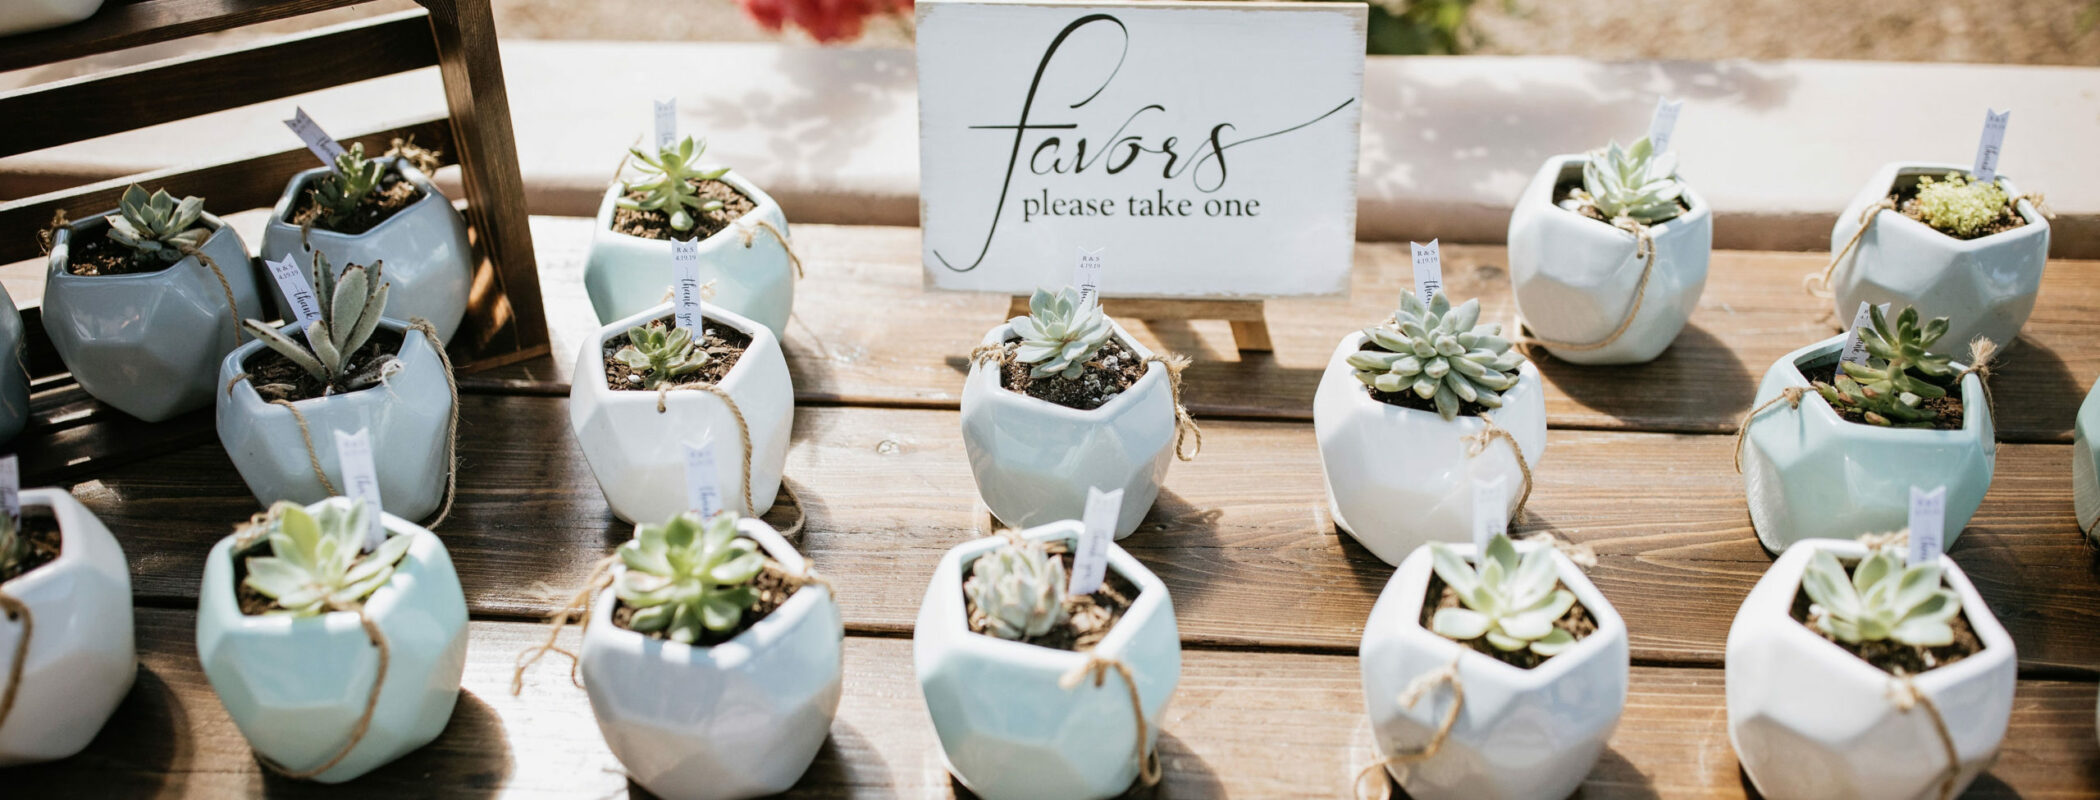 Wedding Favors your Guests will Want to Take Home featured image